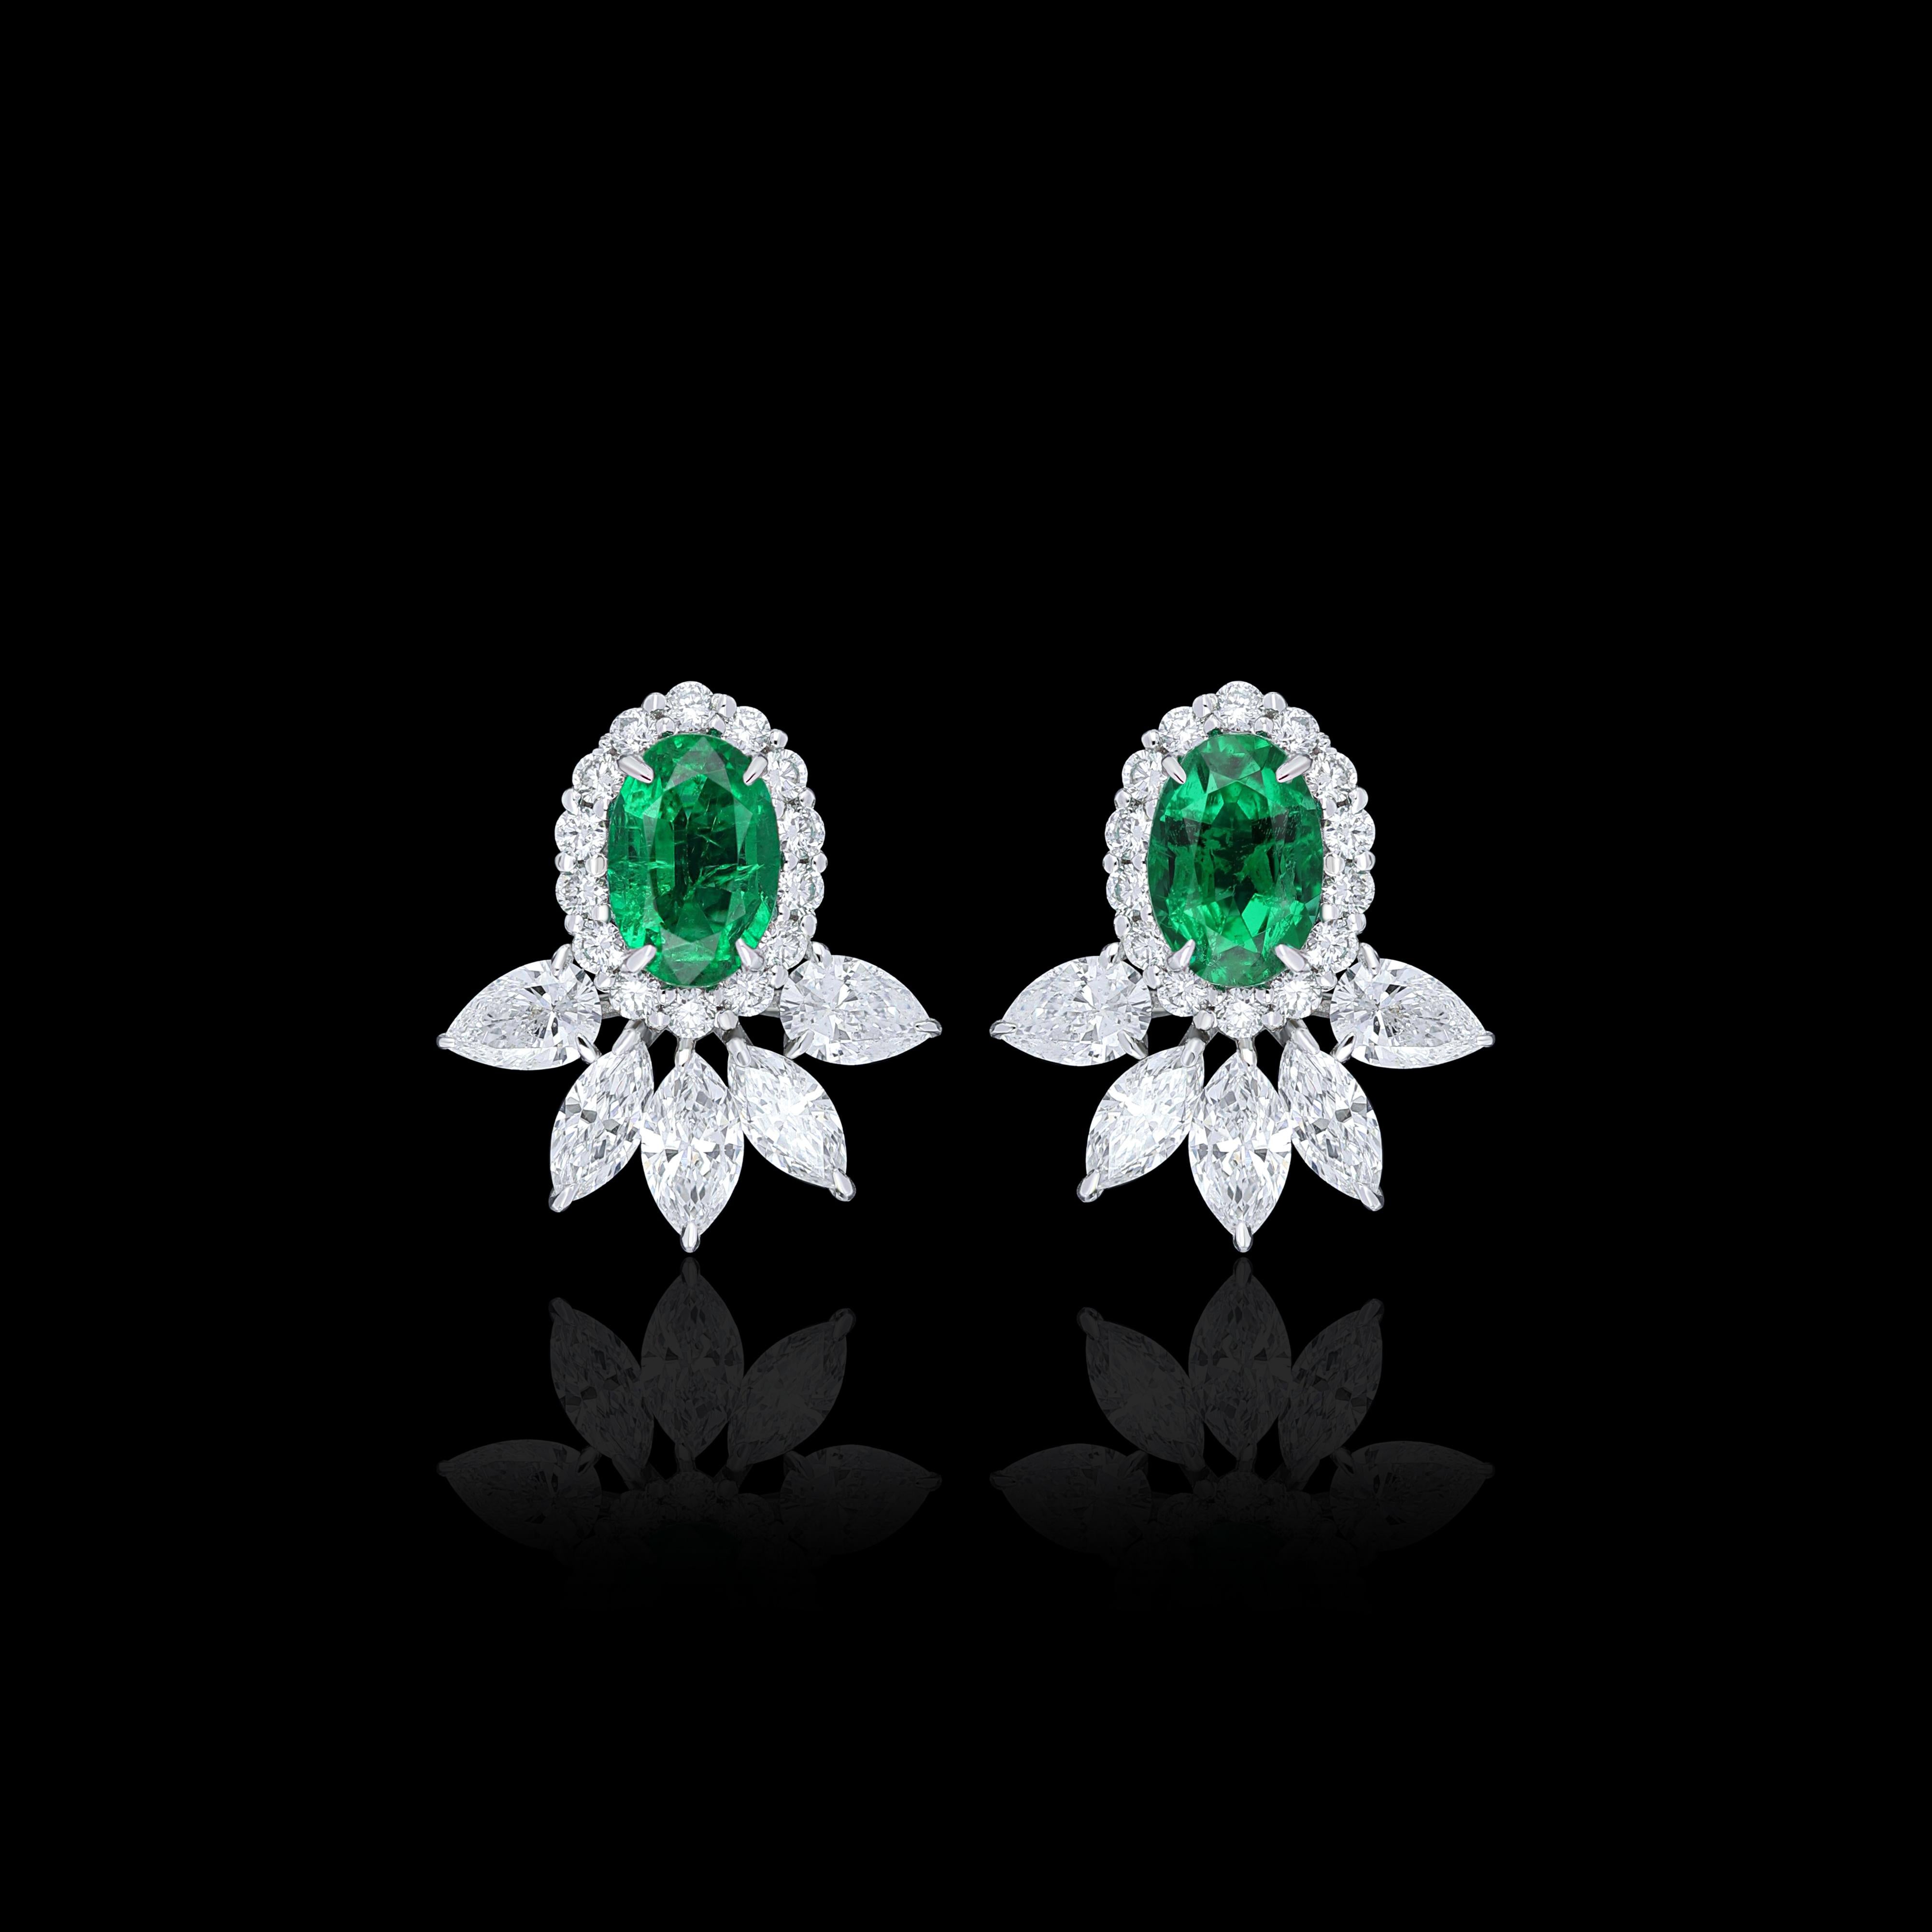 Elegant and exquisitely detailed 18 Karat White Gold Earring, centre set with 0.87Cts Oval Shape Emerald and micro pave set Diamonds, weighing approx 1.10Cts Beautifully Hand crafted in 18 Karat White Gold.

Stone Detail:
Emerald: 6x4MM

Stone